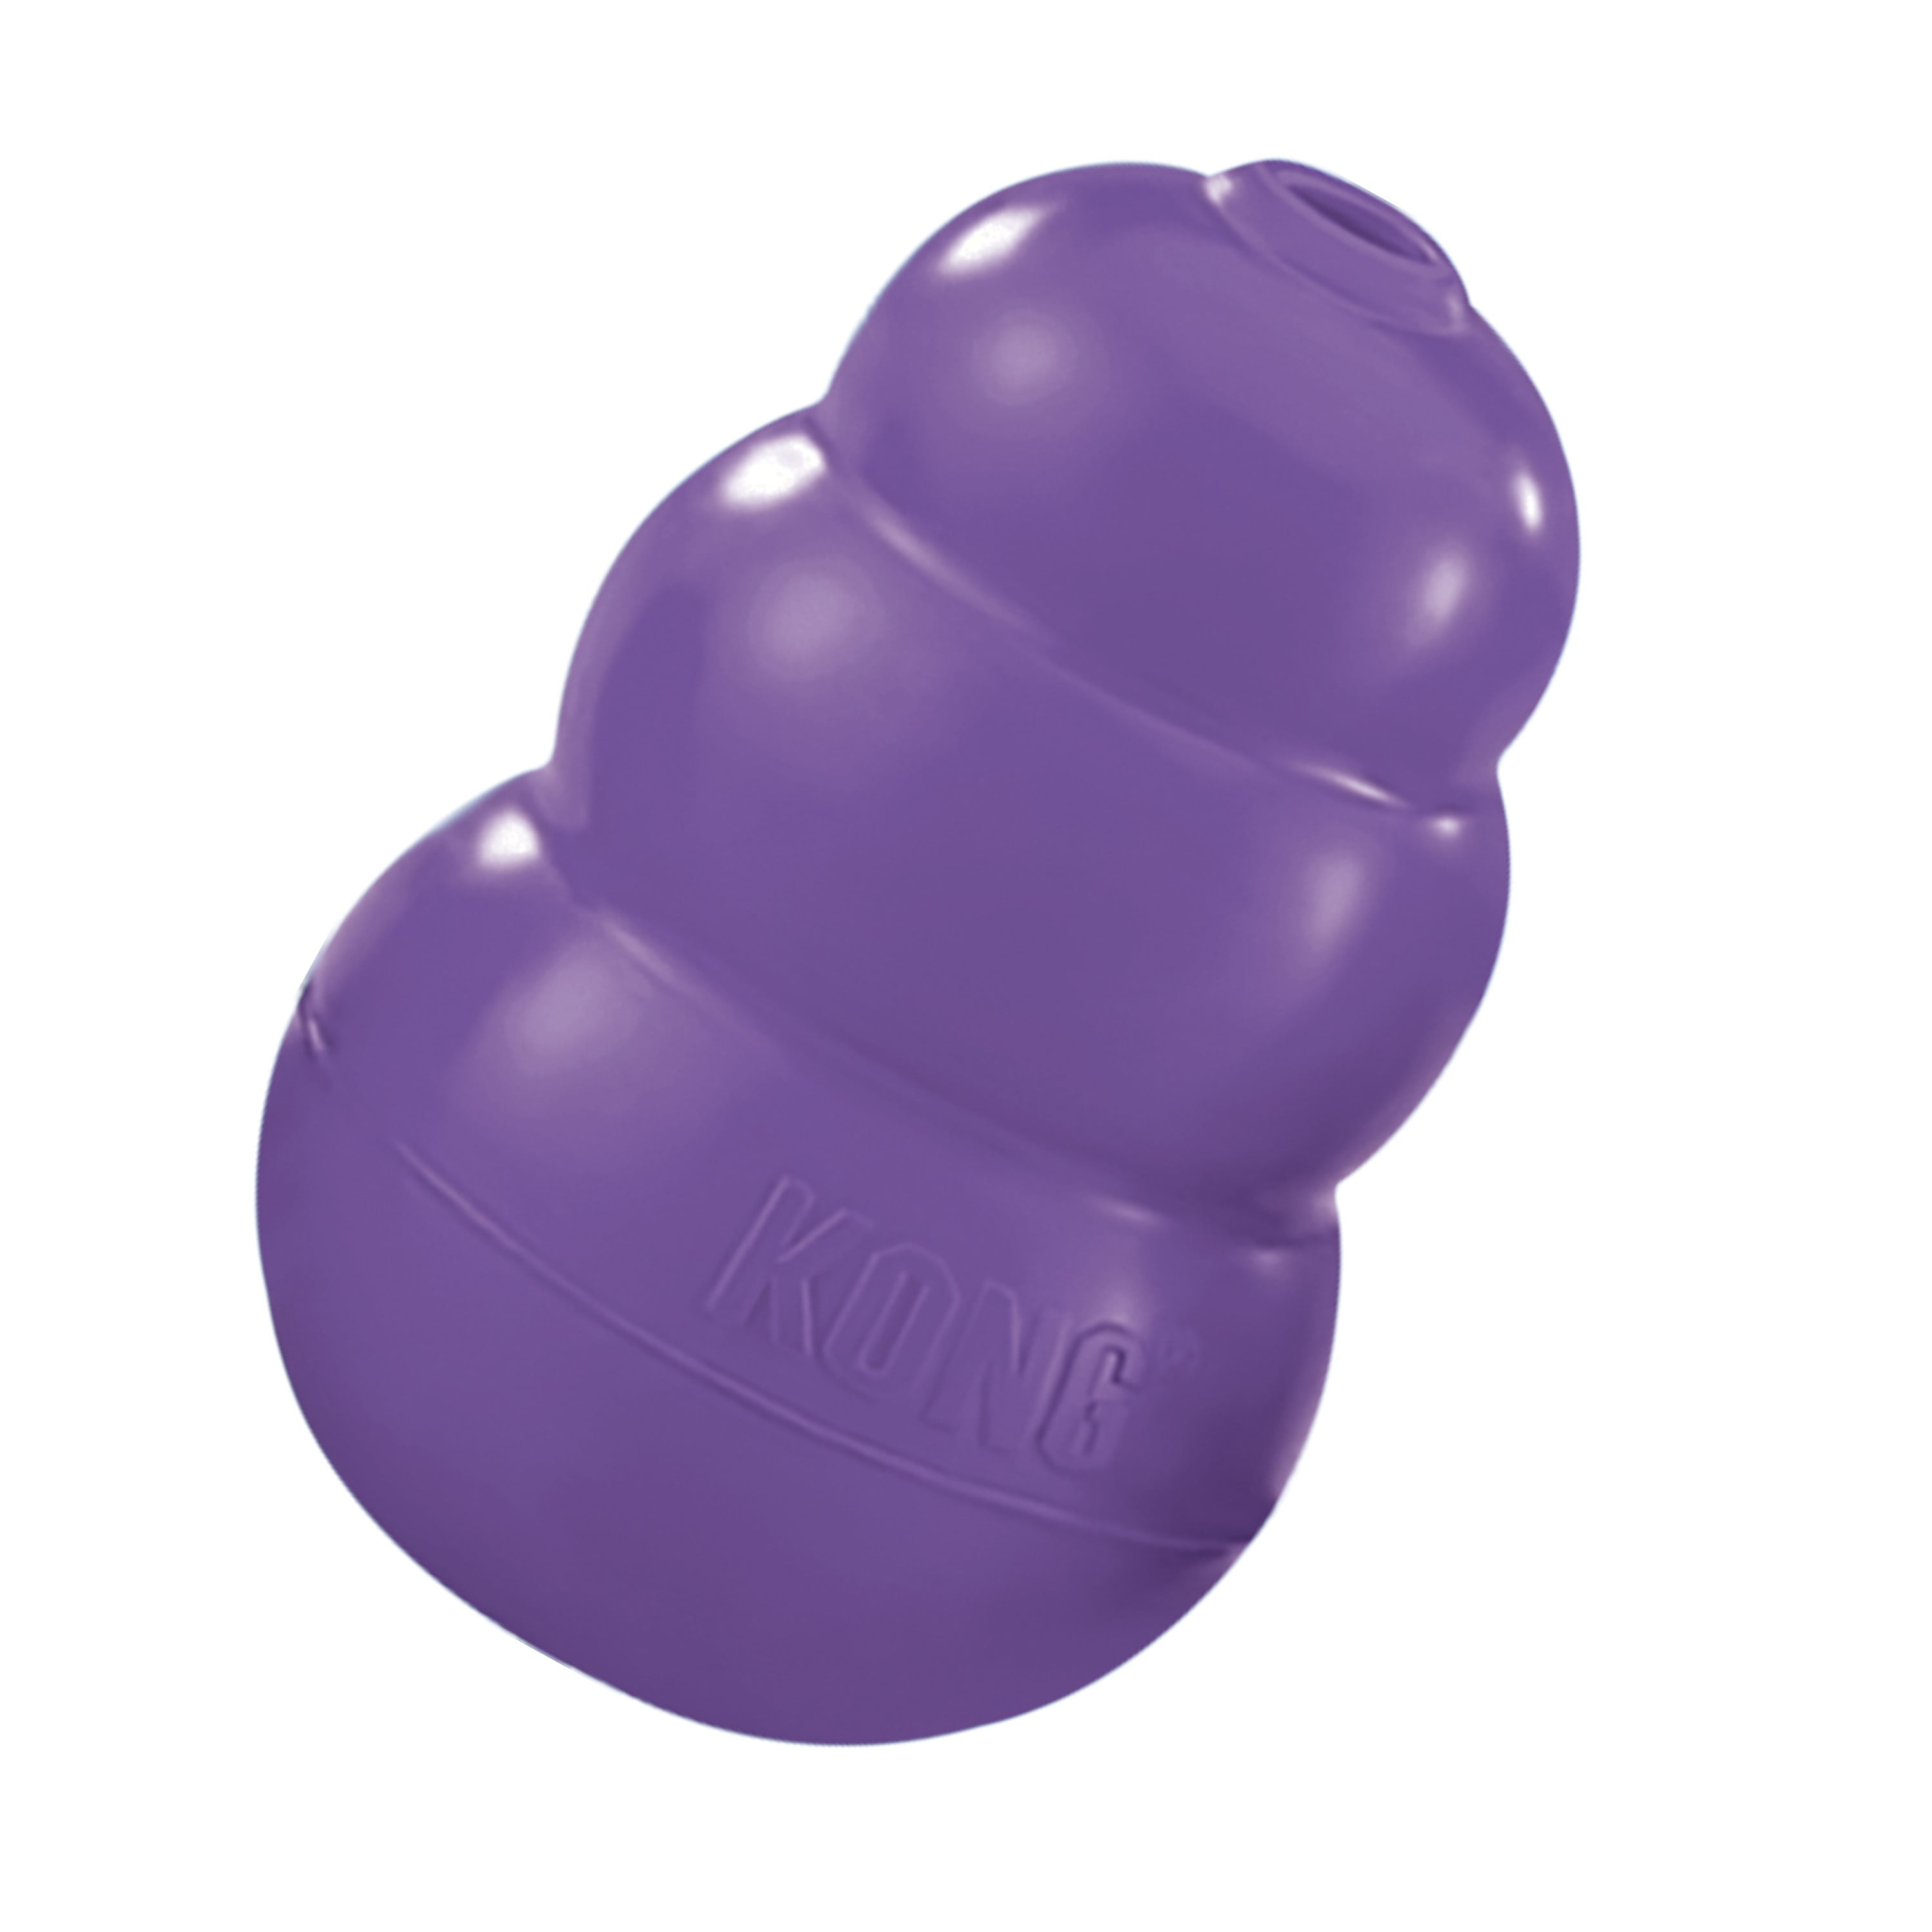 KONG Senior Dog Toy Gentle Natural Purple Rubber Chew, Chase and